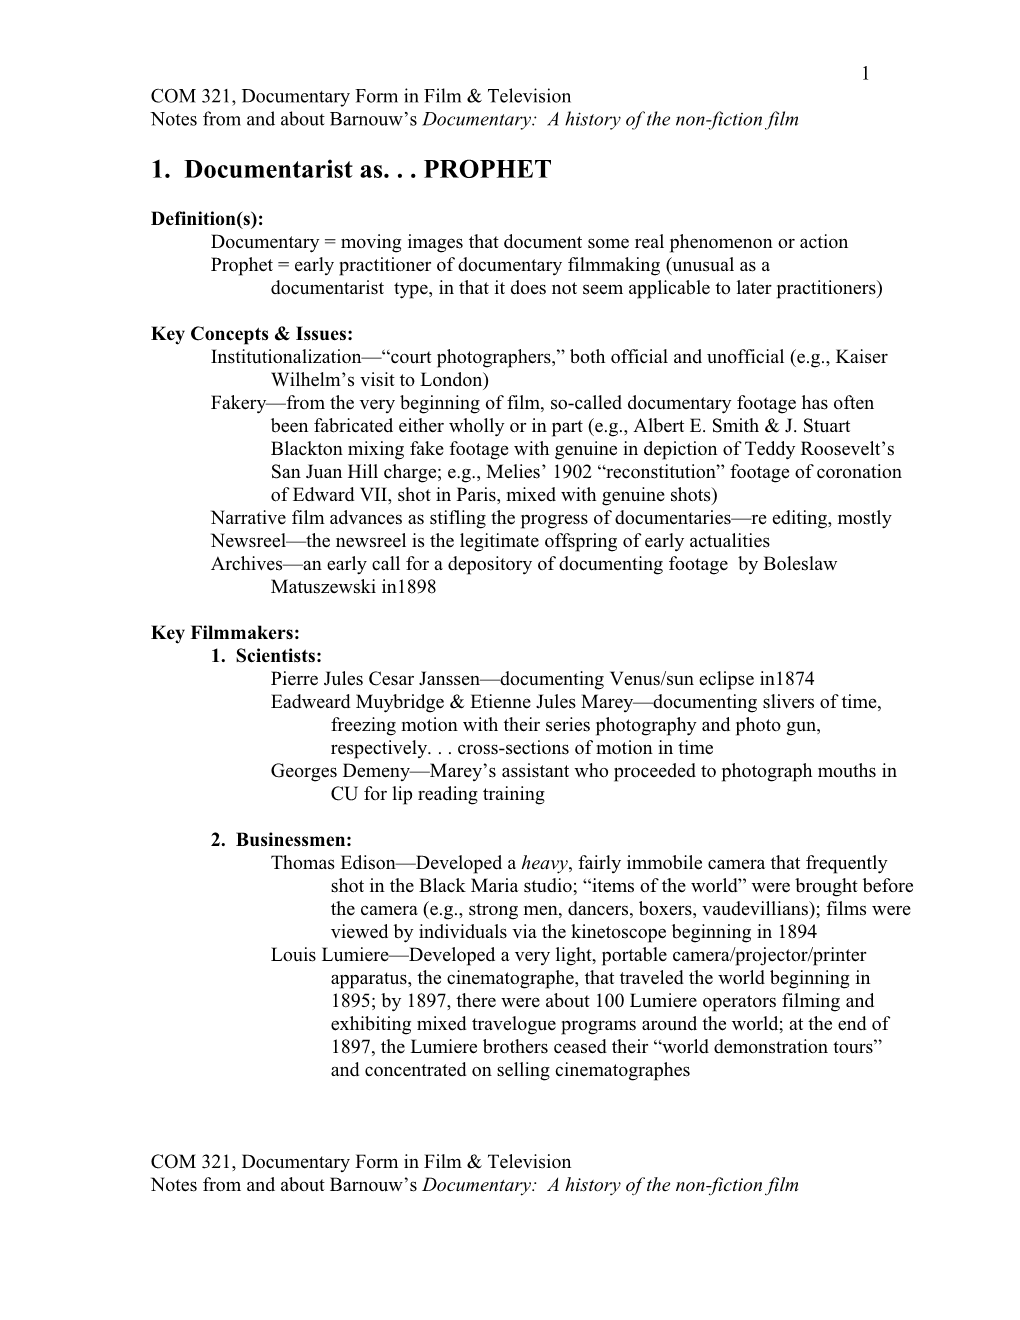 COM 321, Documentary Form in Film & Television s3